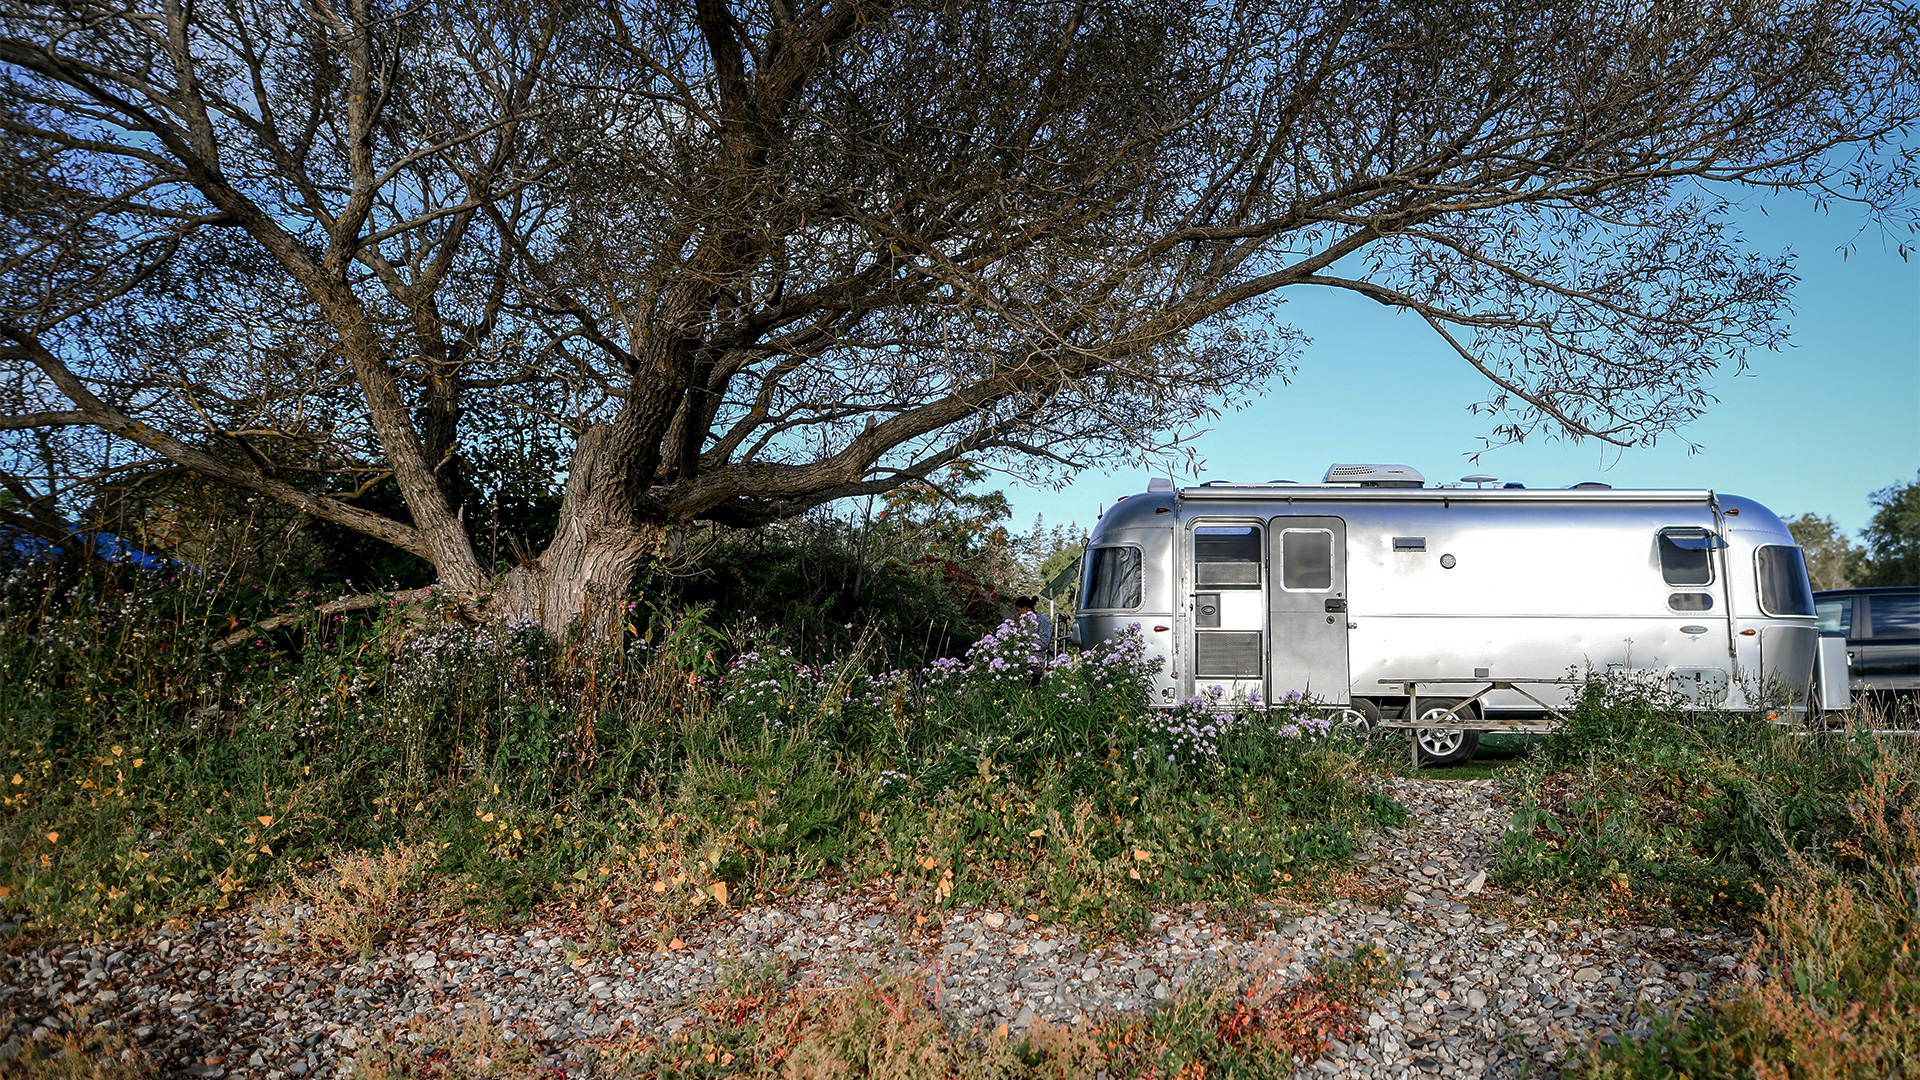 An Airstream travel trailer sitting in a field of grass and flowers while a camper is inside the trailer.